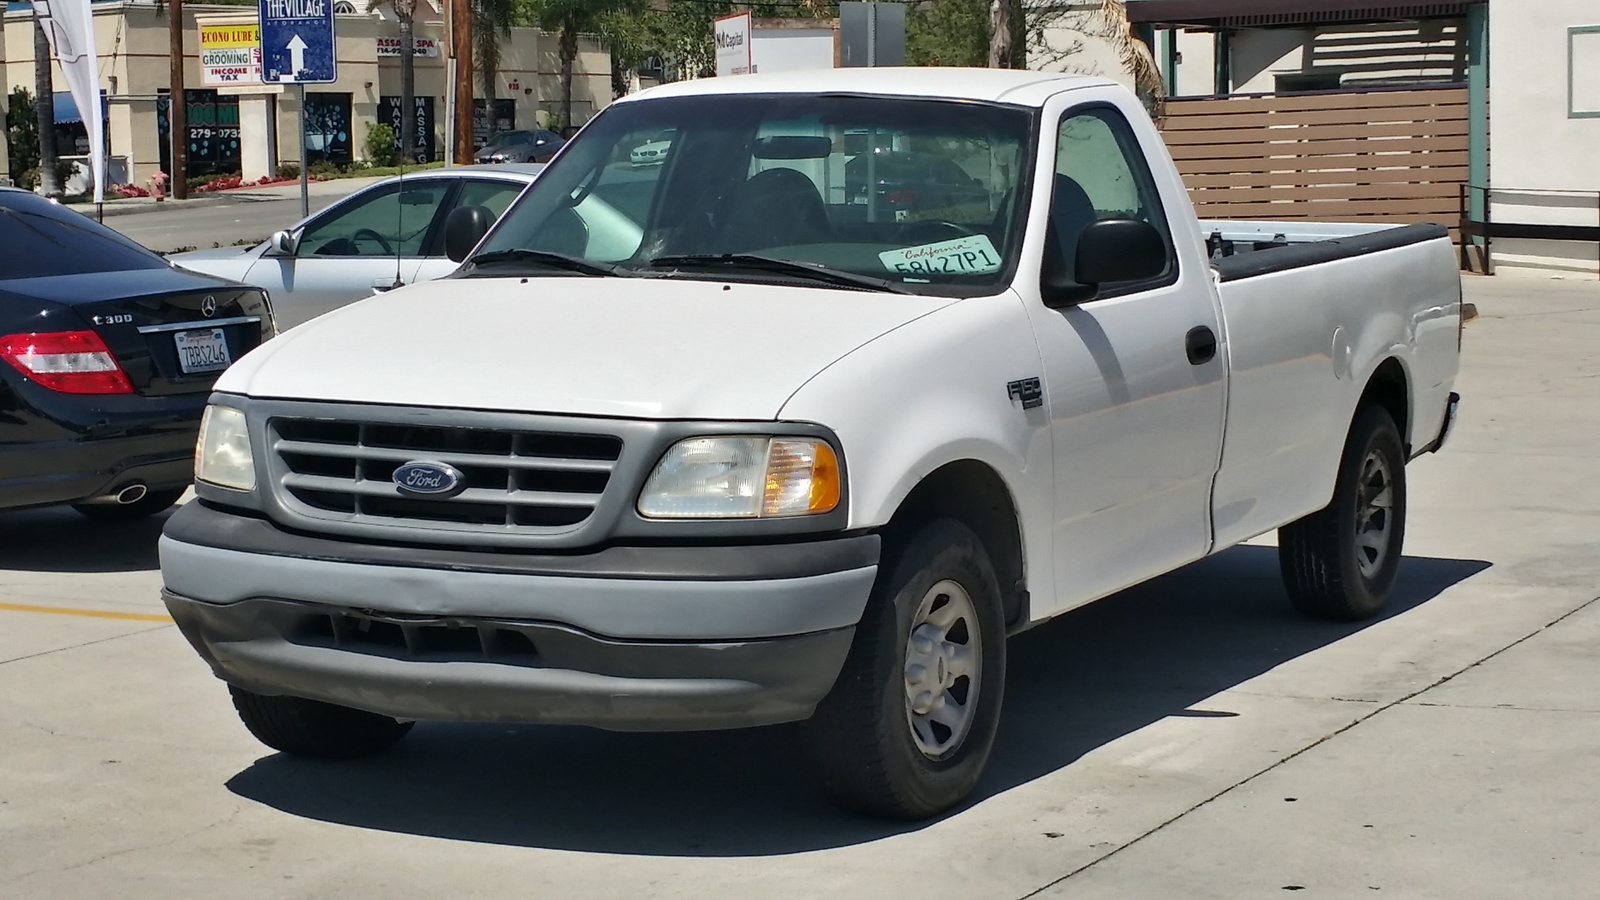 2000 Ford f150 bluebook value #4